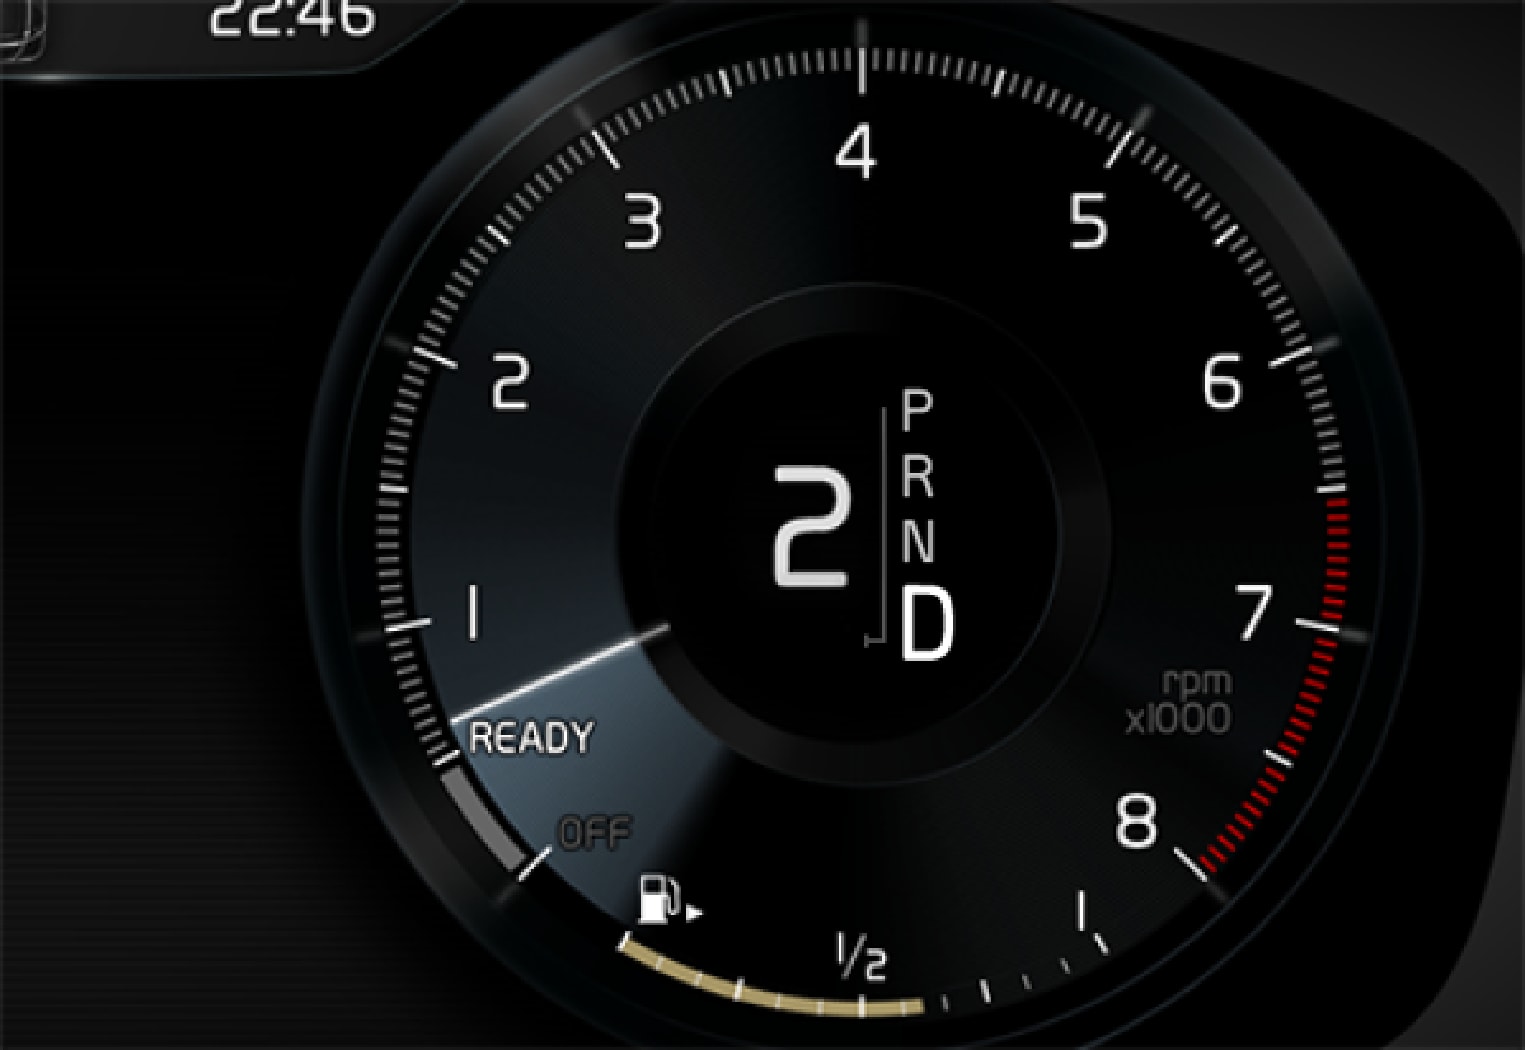 P5-1519-XC90-Gear mode D in driver display